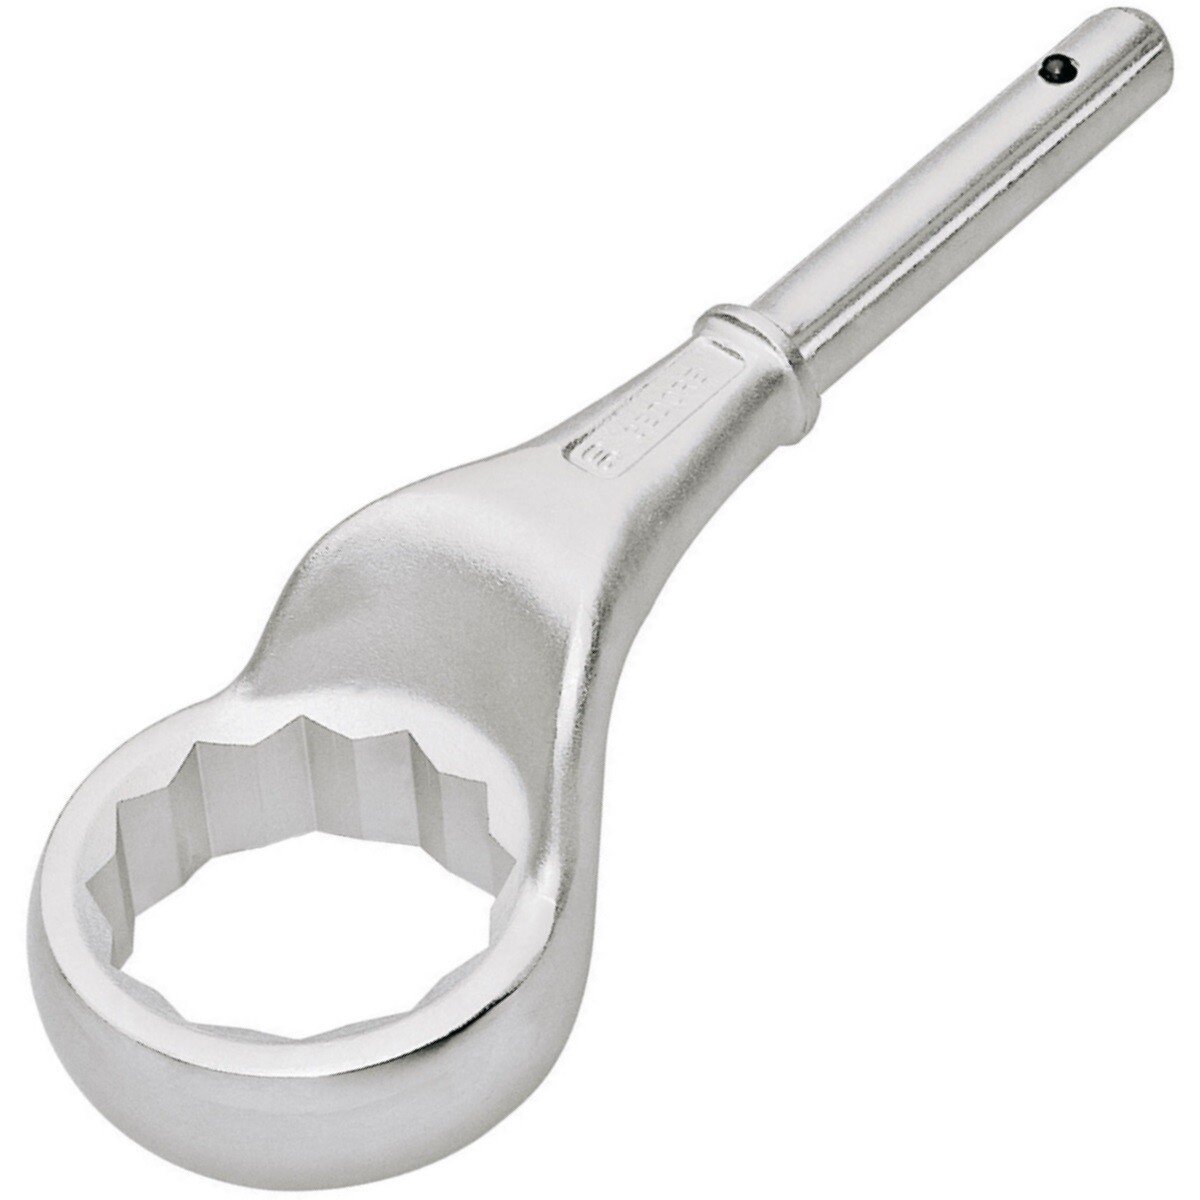 Gedore 6033920 27mm Single Ended Ring Spanner 2A 27